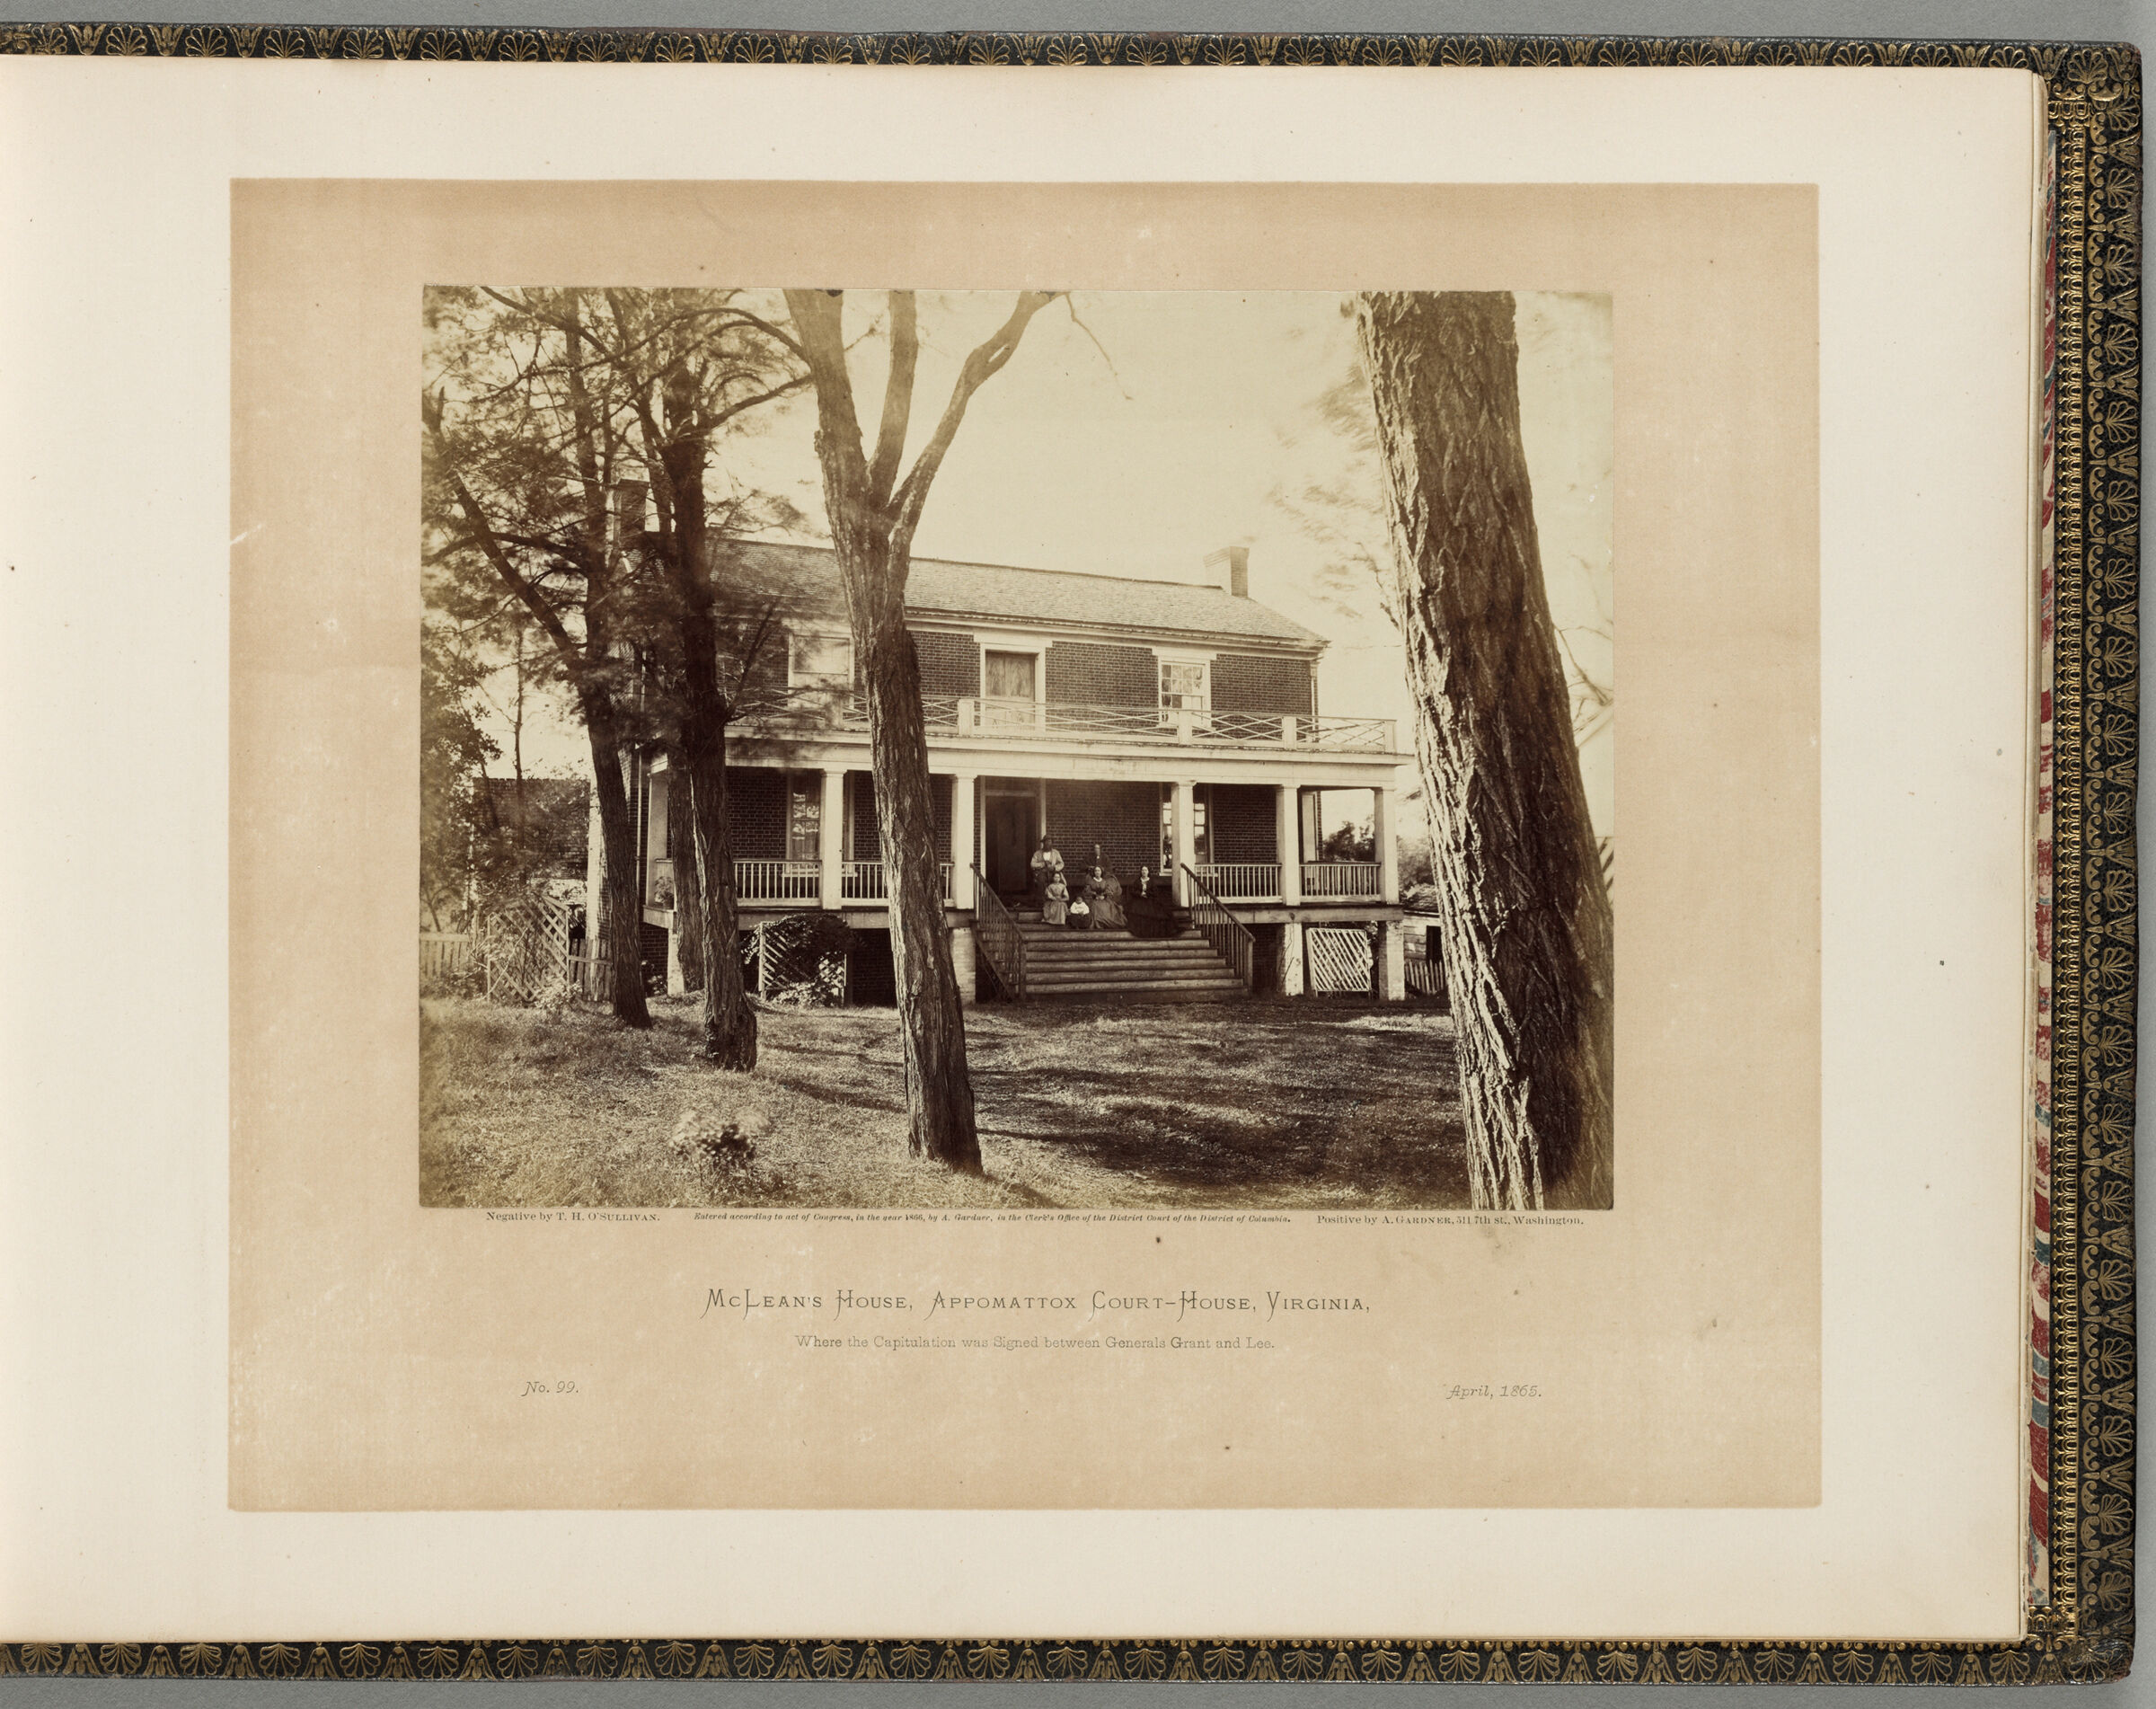 Mclean's House, Appomattox Court-House, Virginia, Where The Capitulation Was Signed Between Generals Grant And Lee